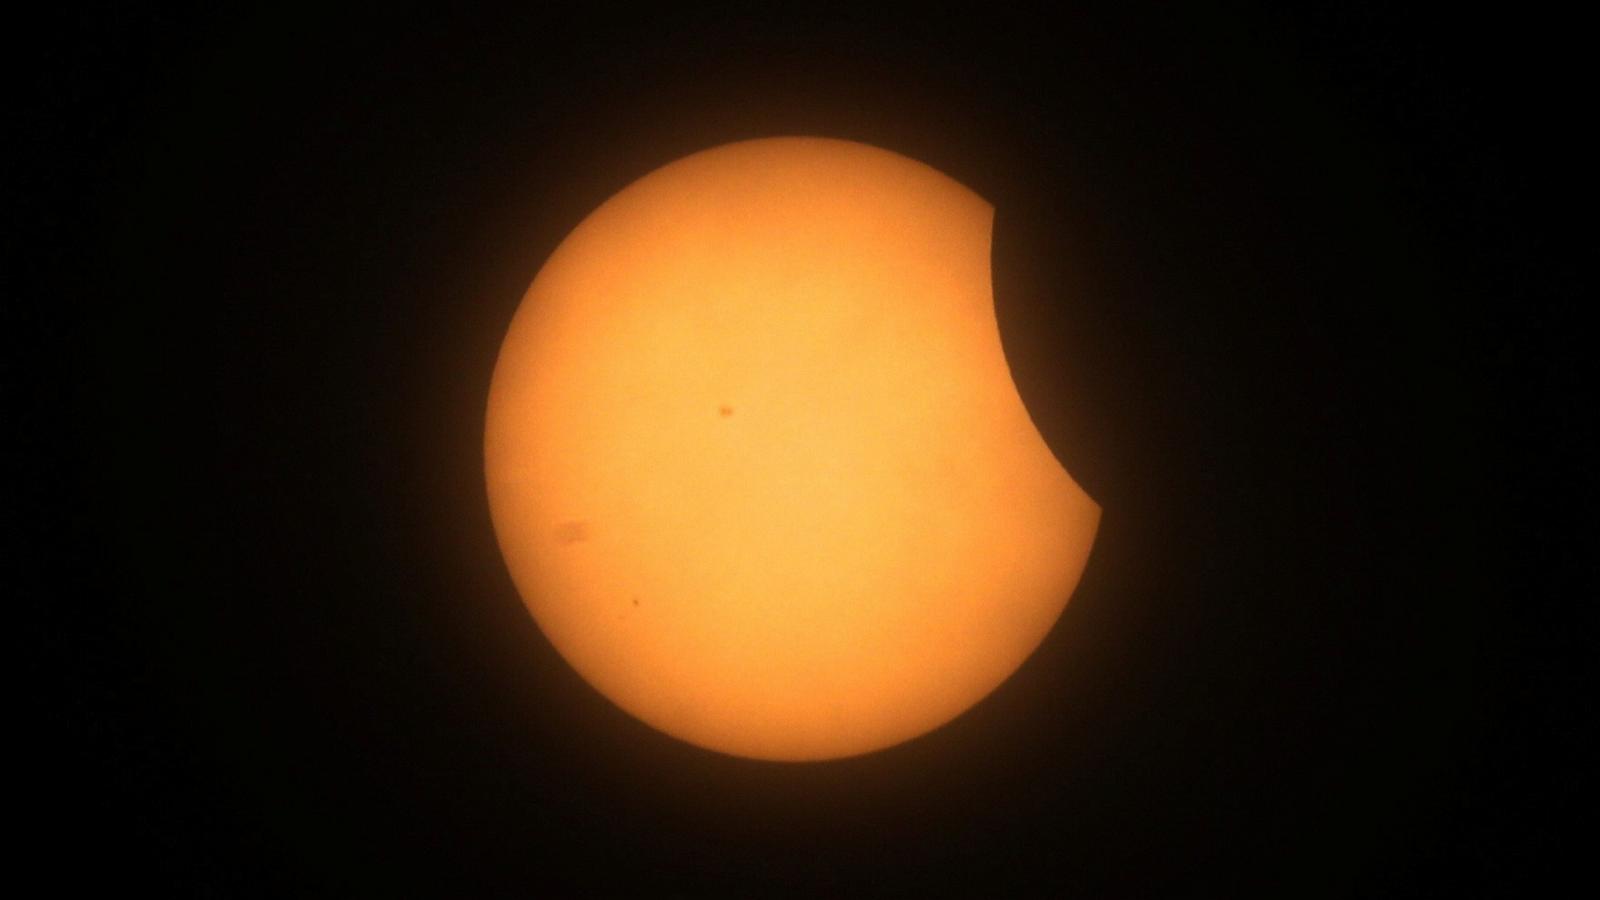 Solar eclipse live updates: Partial eclipse begins in Mexico [Video]